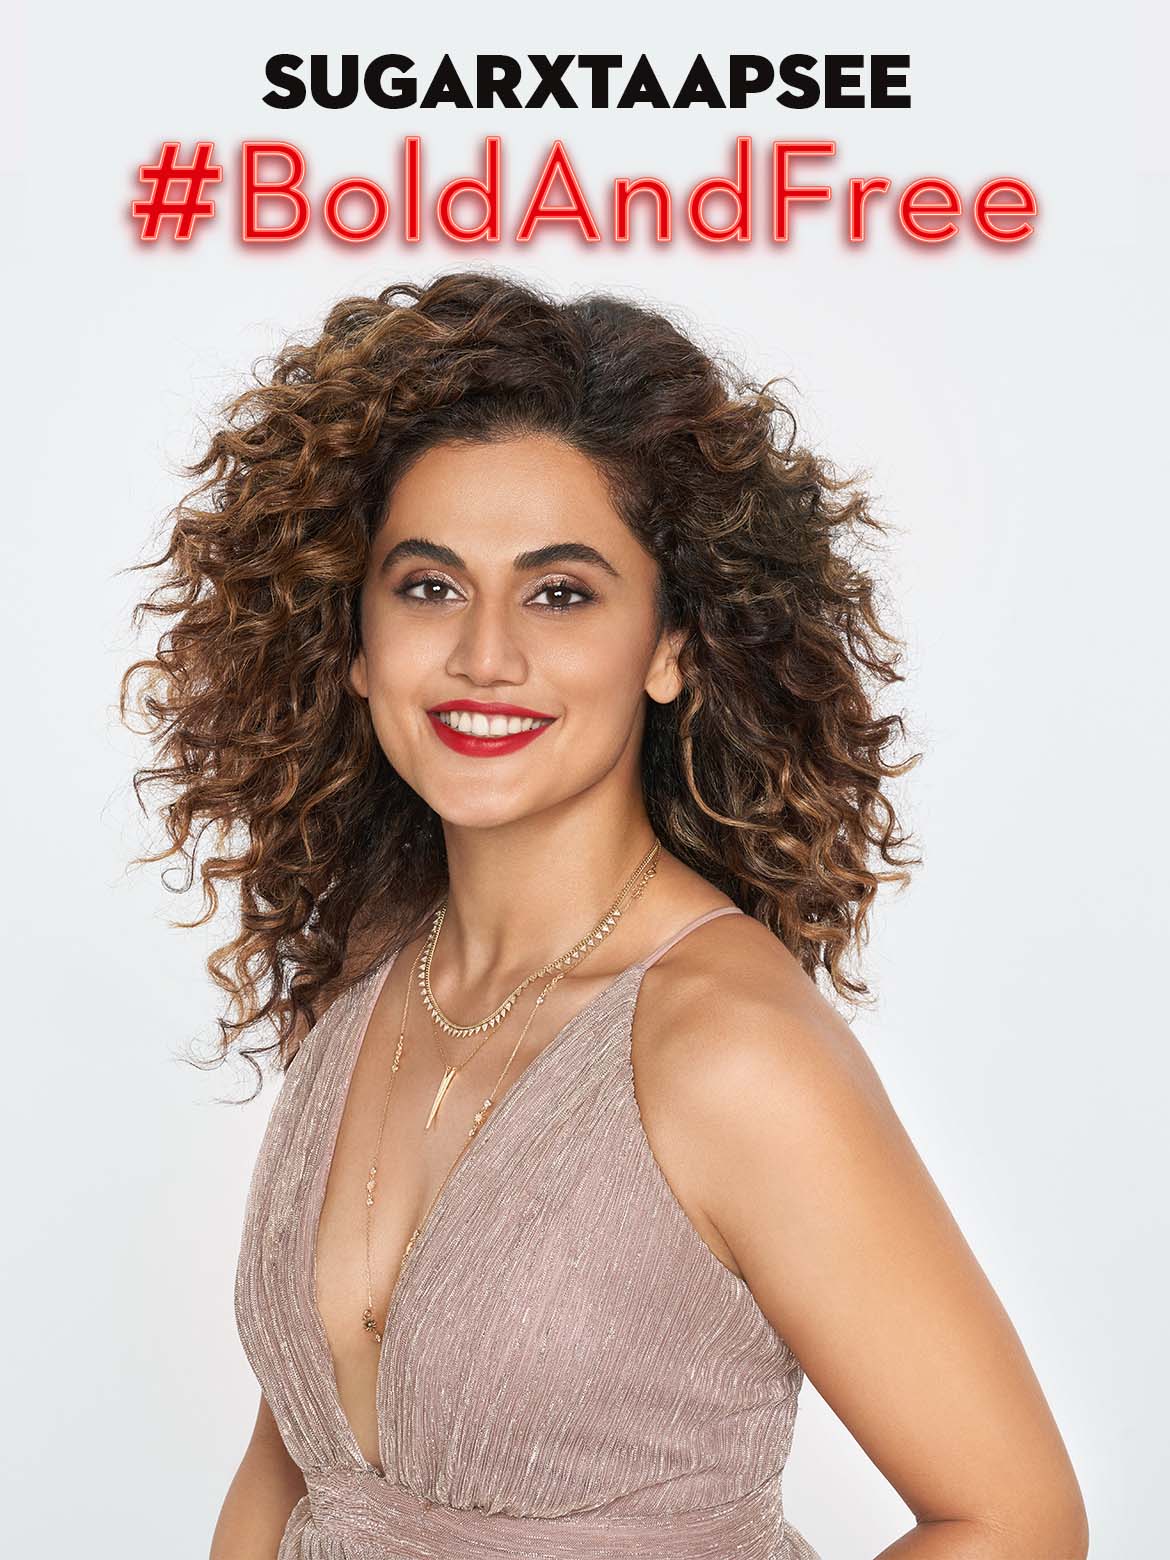 Hard Porn Video Tapsi Pannu - Taapsee Pannu Sizzles As The Face Of SUGAR's New Campaign #BoldAndFree |  SUGAR Cosmetics